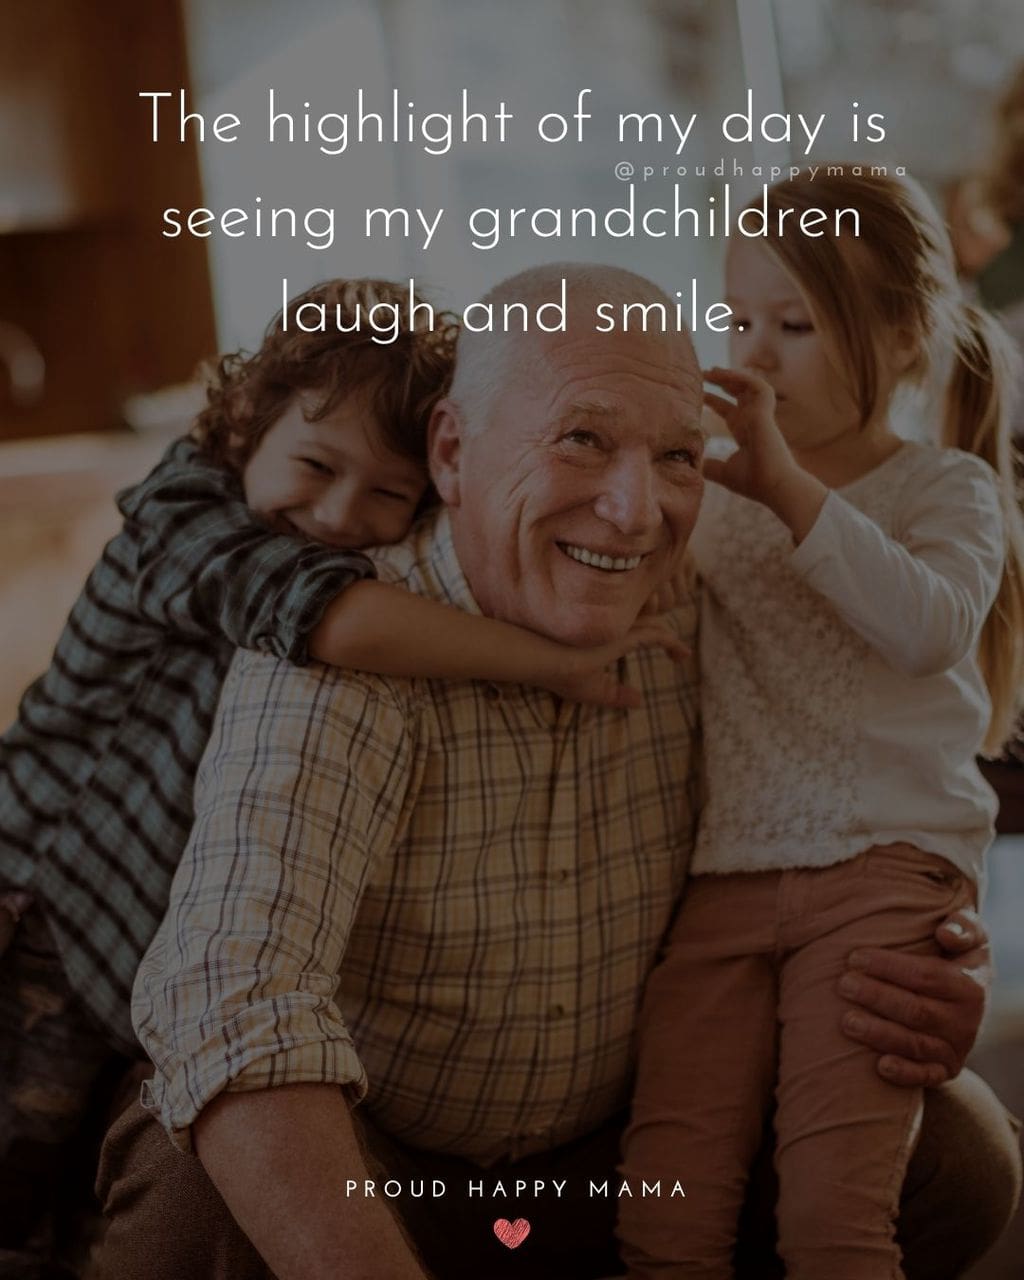 Quotes for Grandchildren - The highlight of my day is seeing my grandchildren laugh and smile.